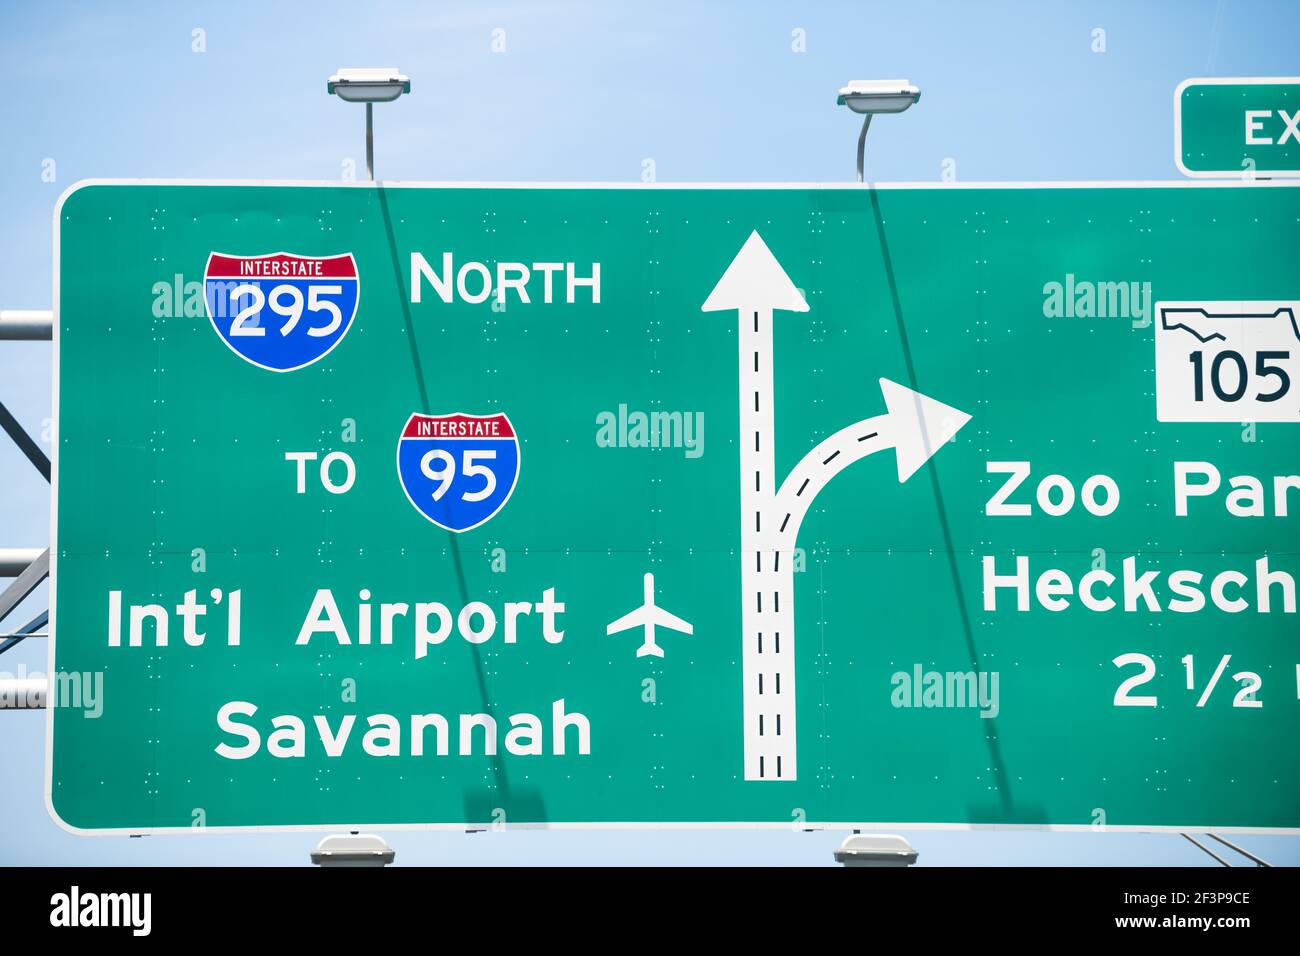 Jacksonville, Florida interstate highway 295 with traffic road sign to i-95 international airport of Savannah and Zoo parkway with cars driving in sum Stock Photo